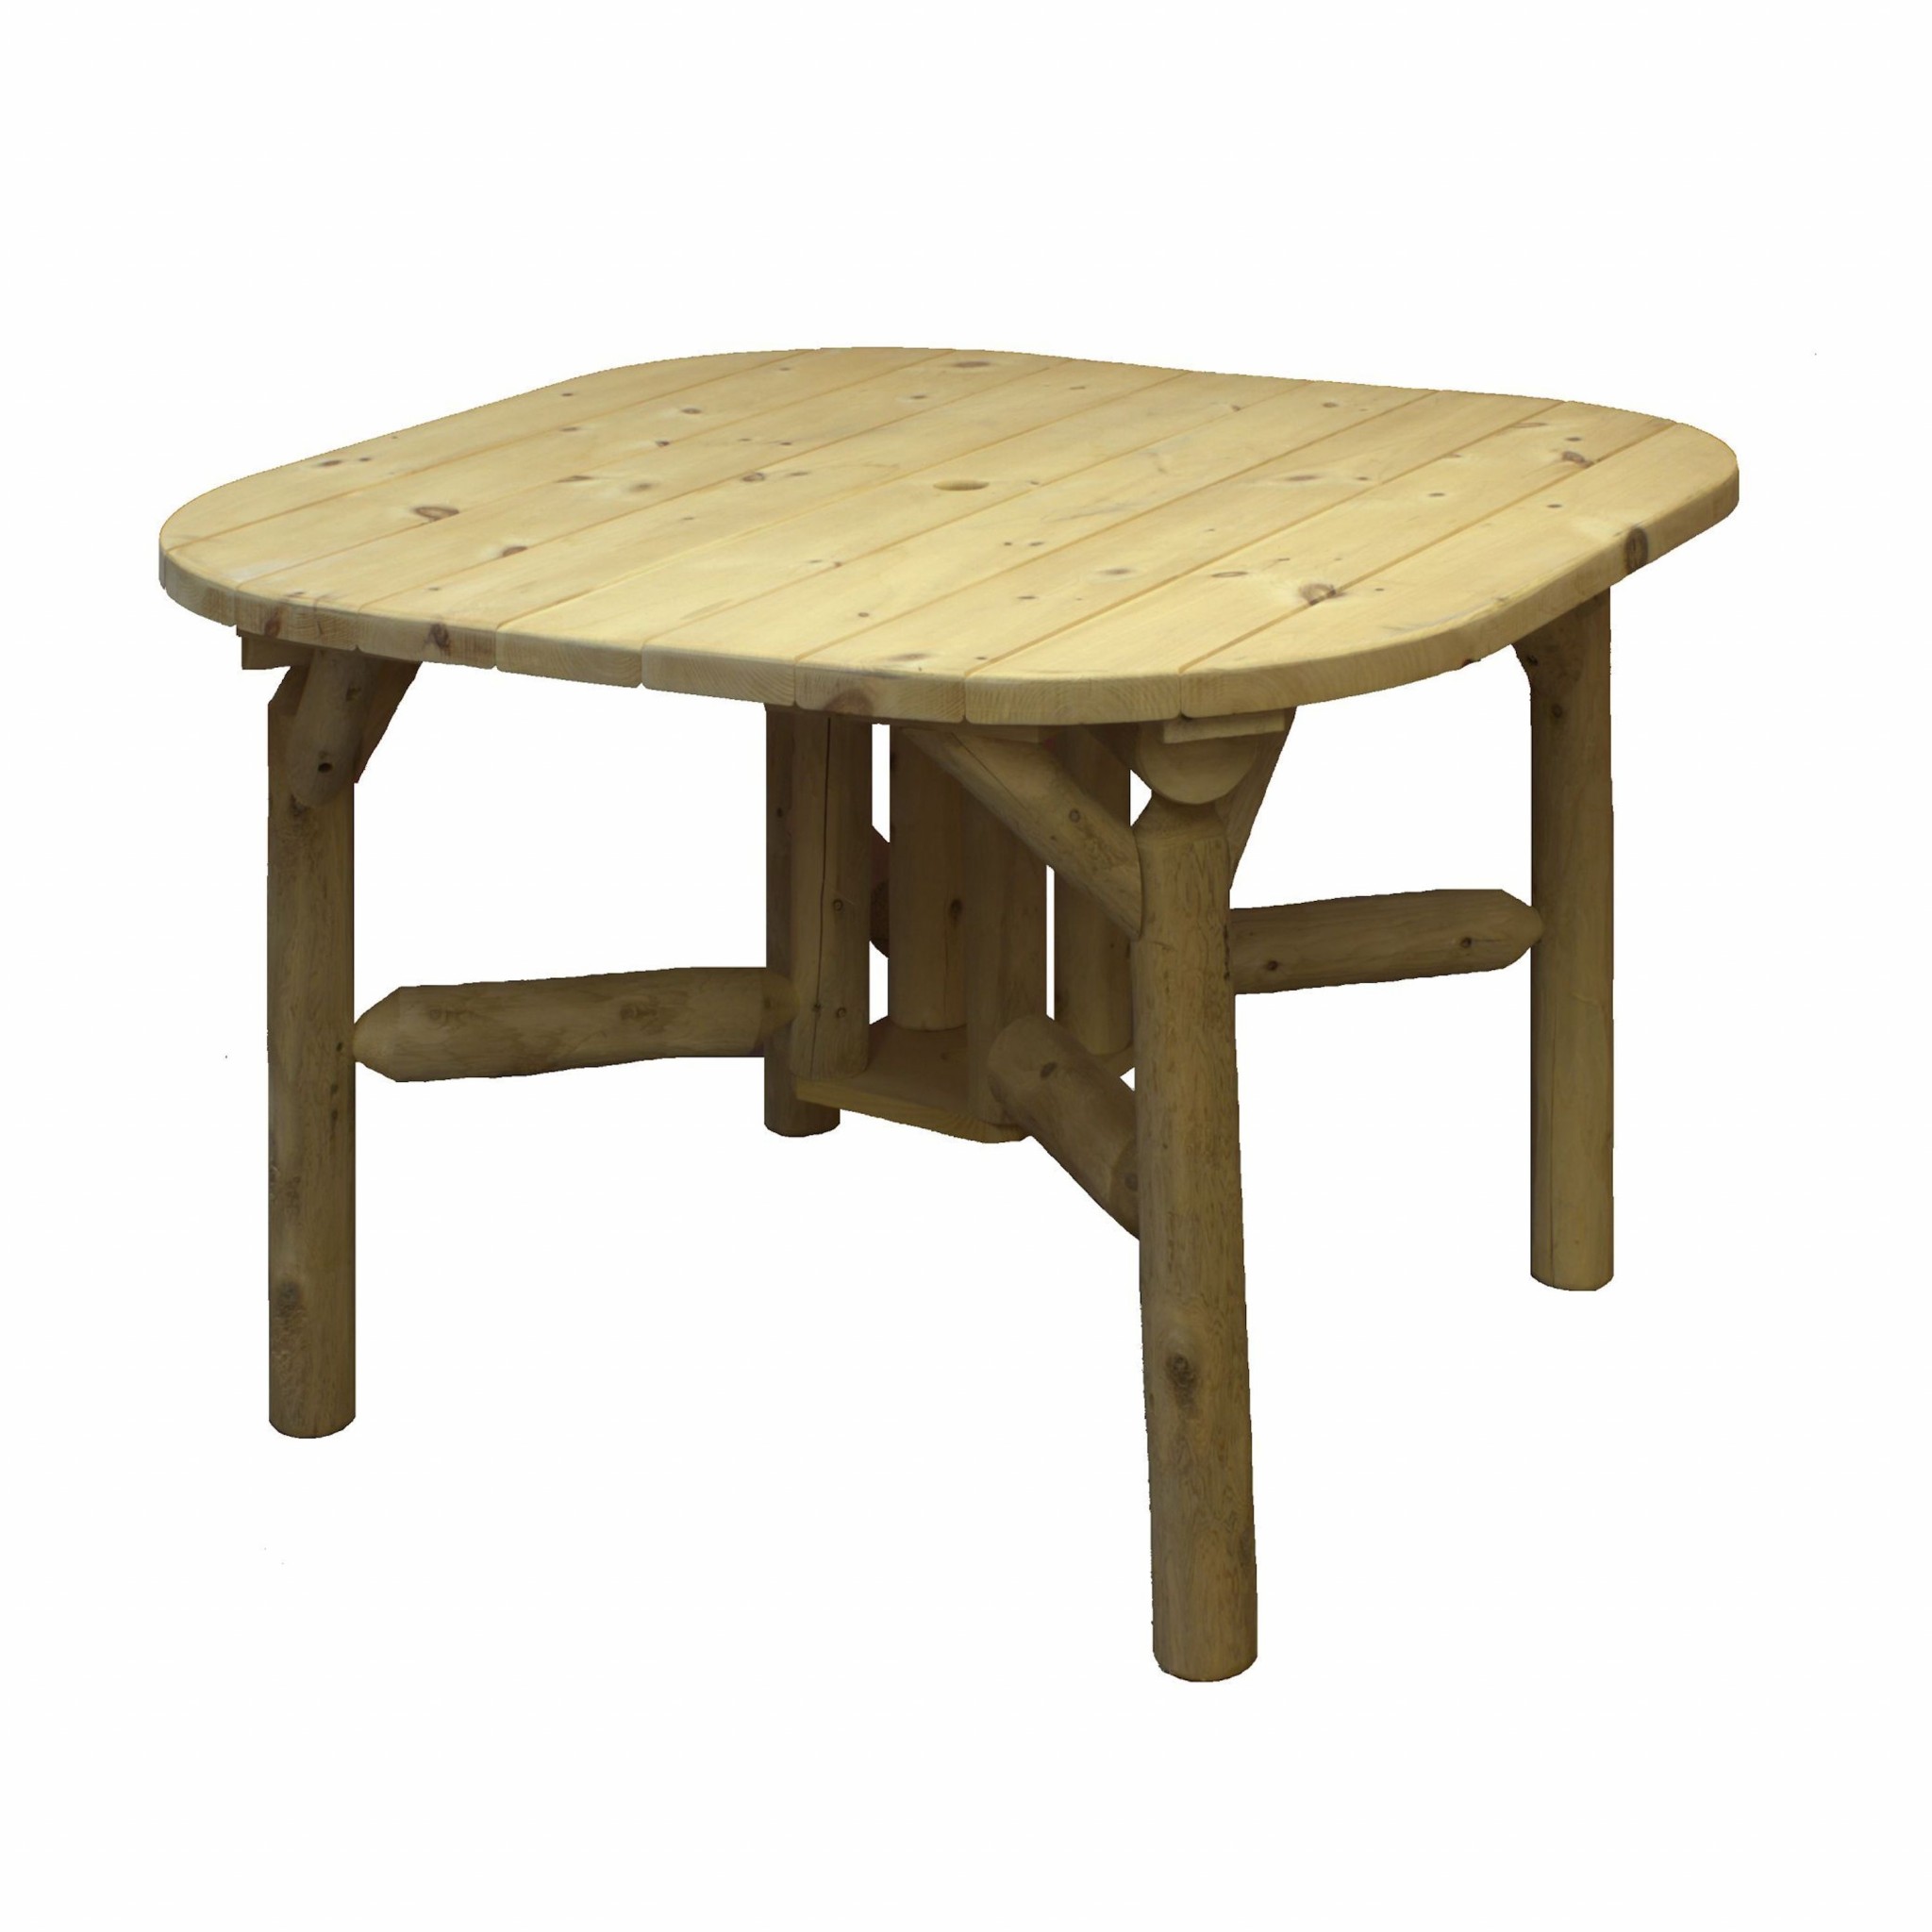 47" X 47" X 30" Natural Wood Roundabout Table